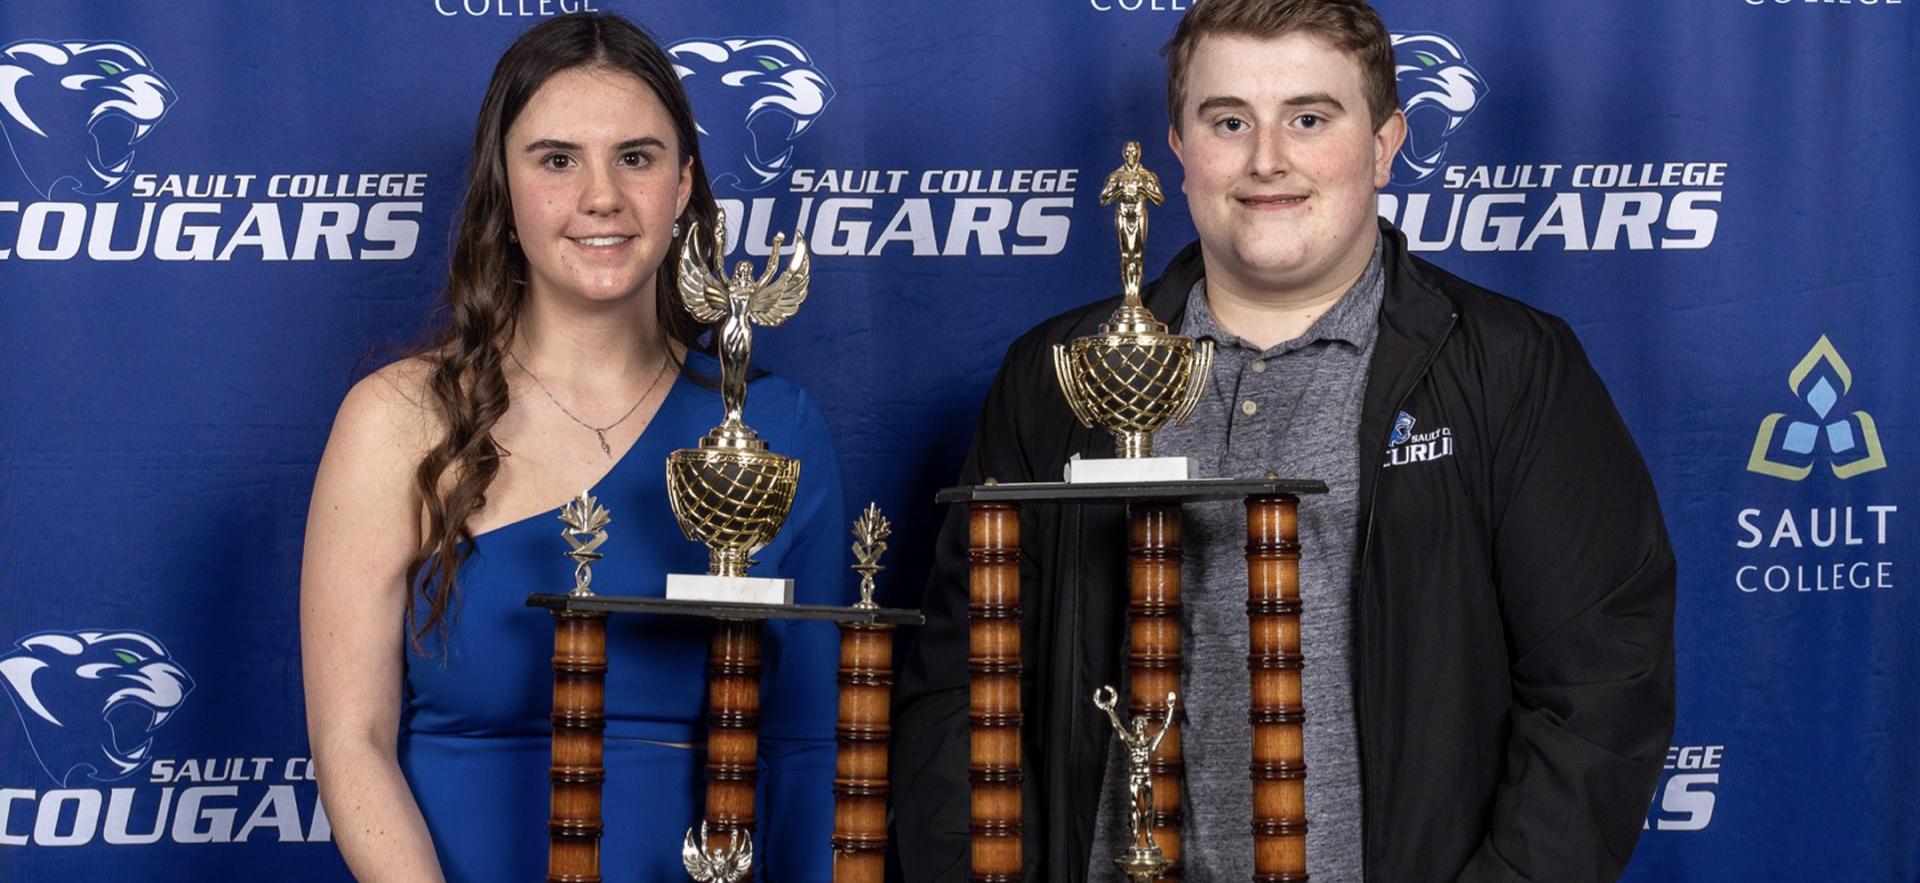 women in blue dress and man in black coat and grey shirt hold trophies